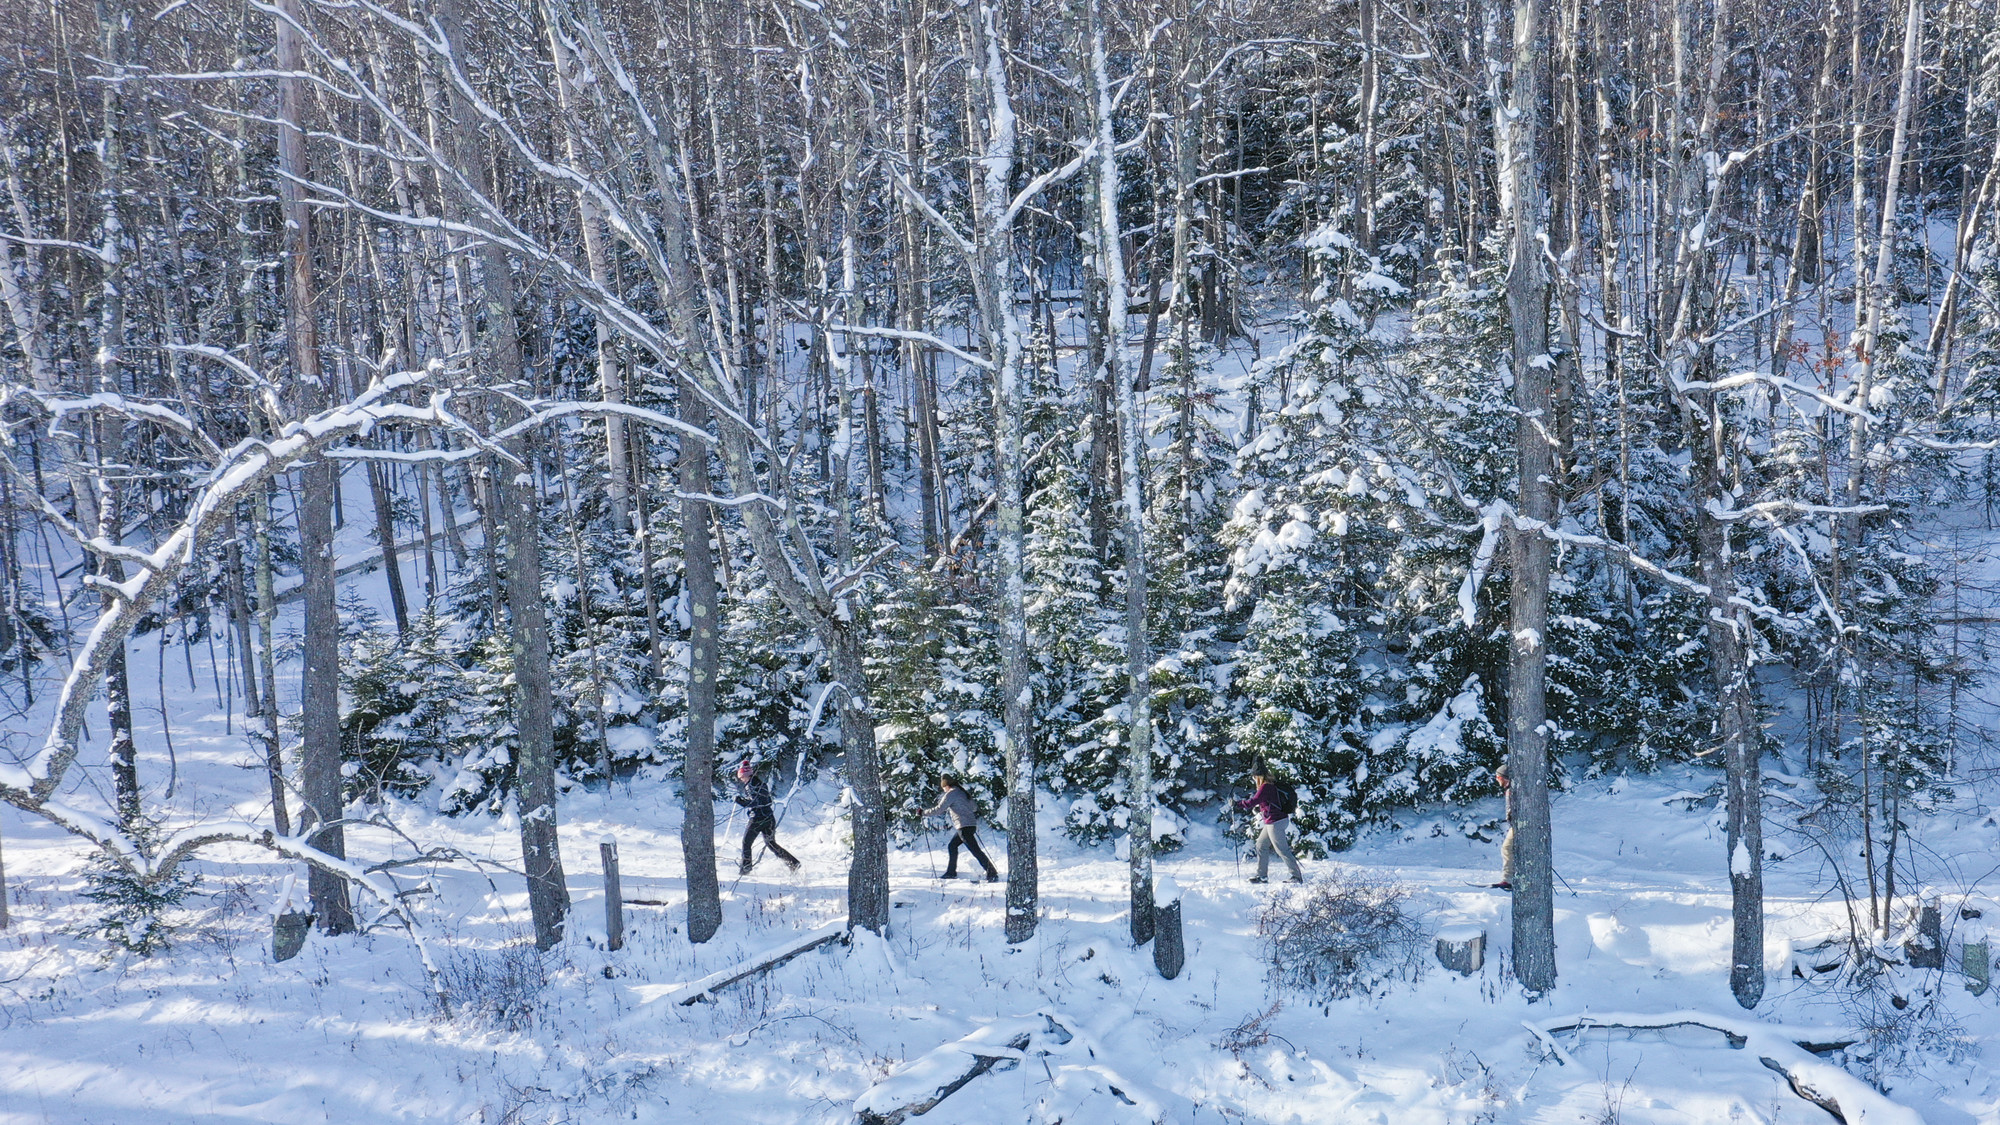 Scenic view of three skiers on a snowy&#44; wooded cross-country ski trail.